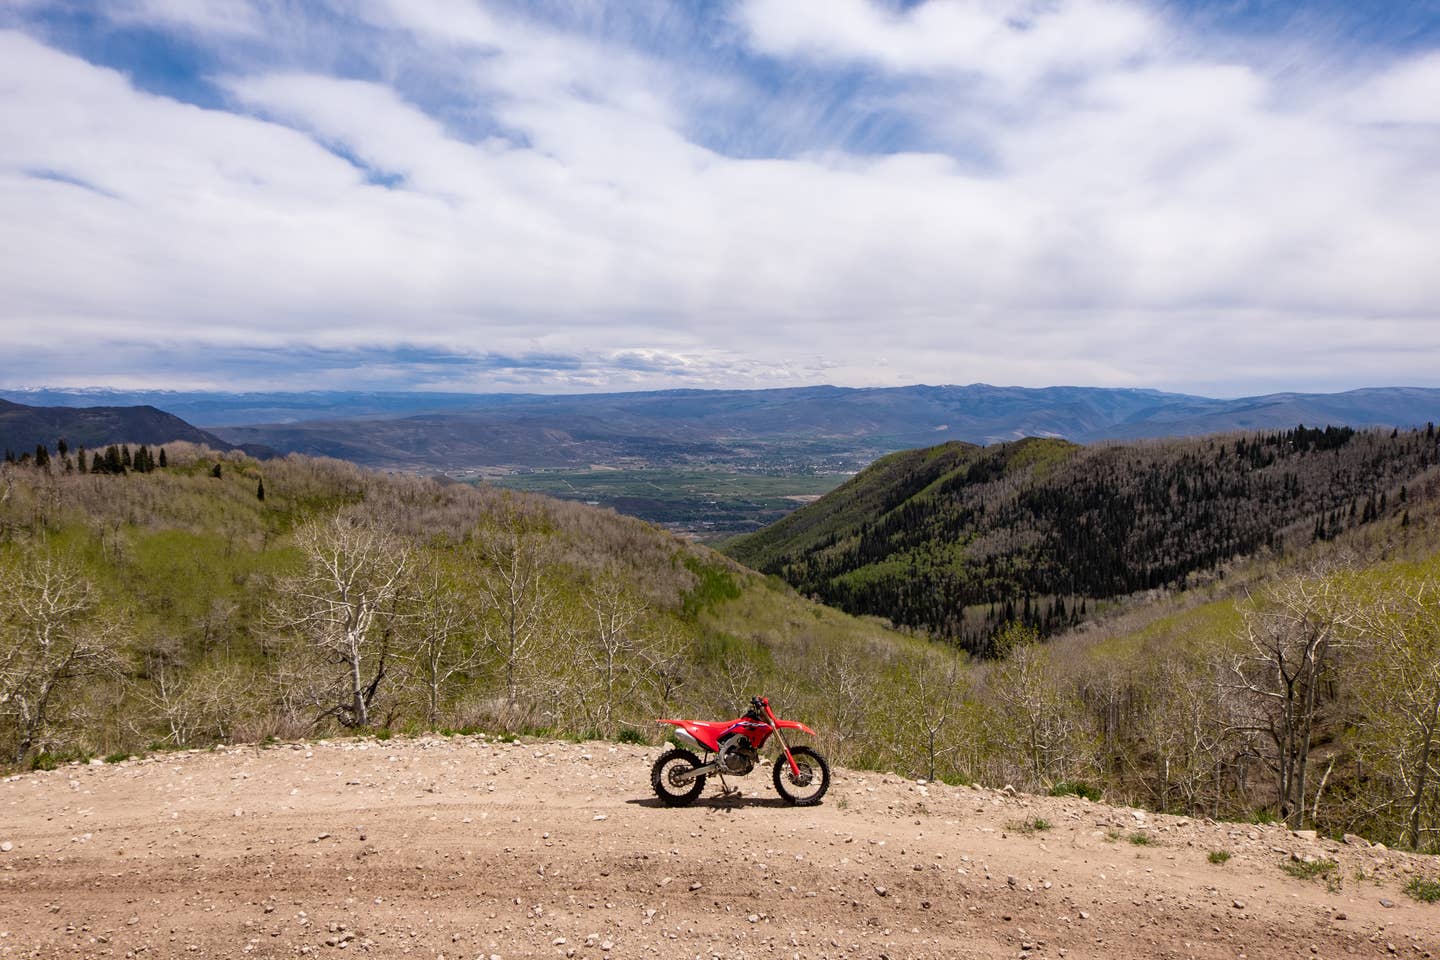 At the top of the mountain with the CRF450RX.